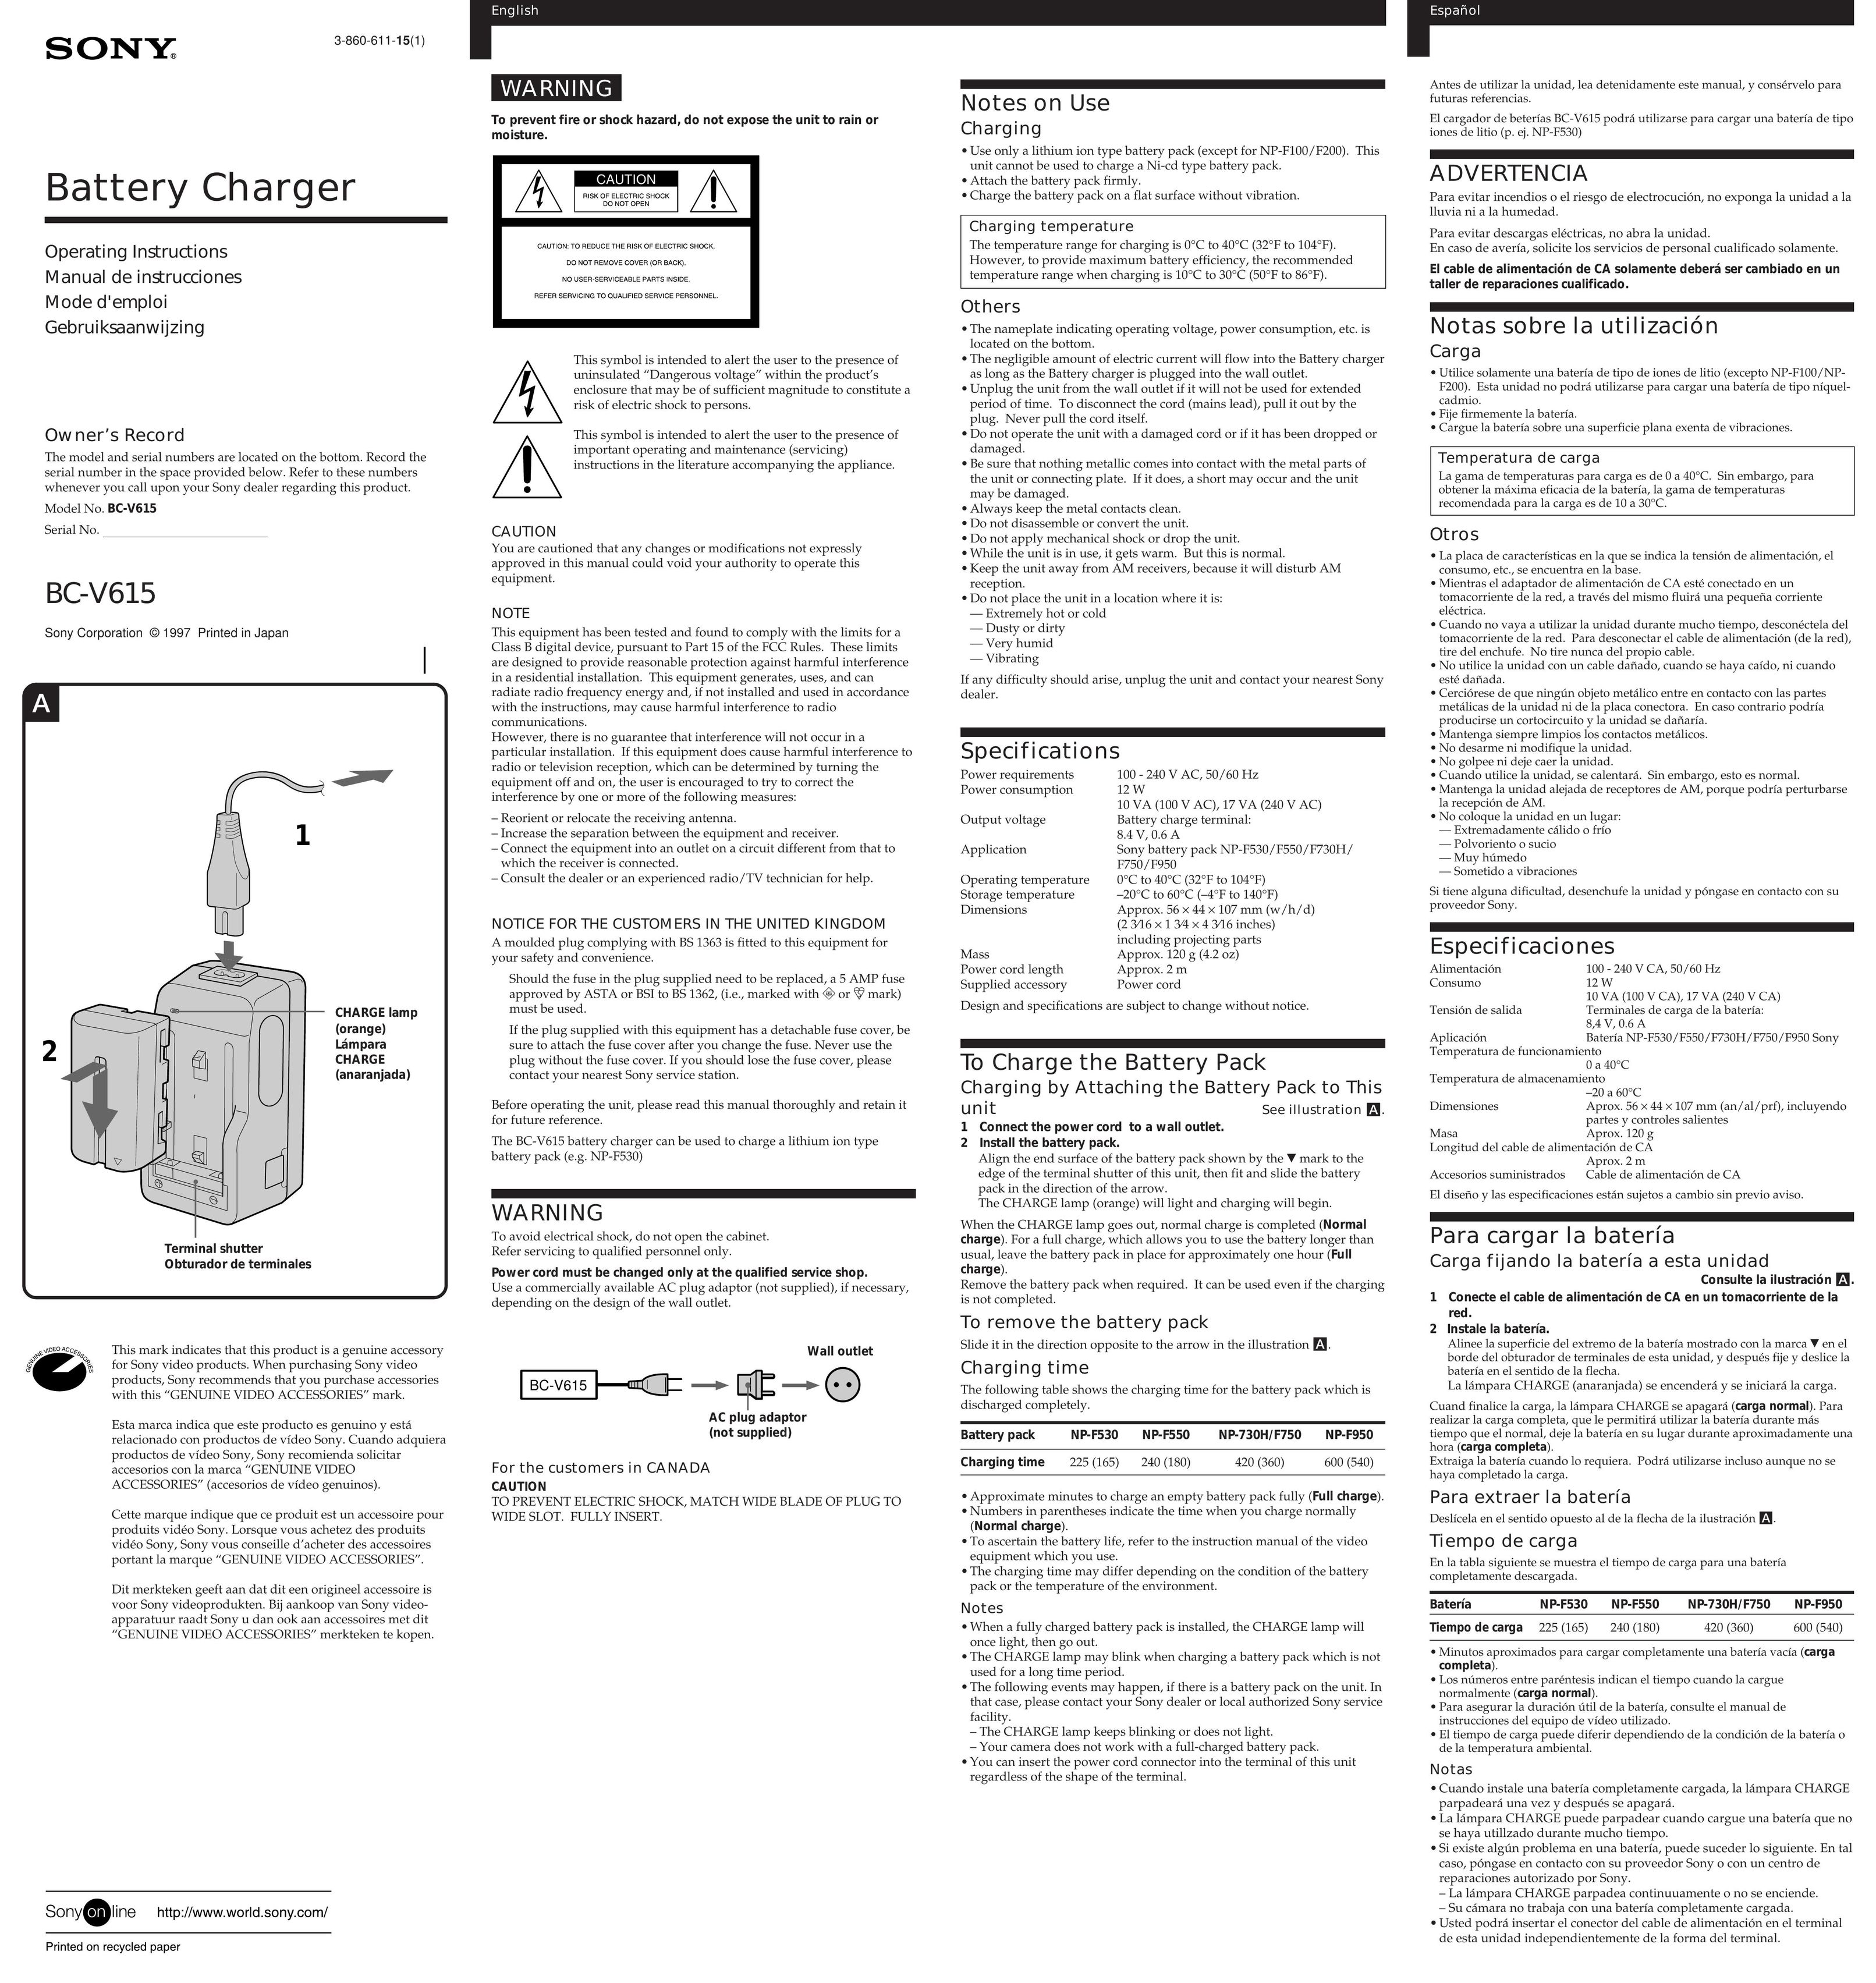 Sony BC V615 Battery Charger User Manual